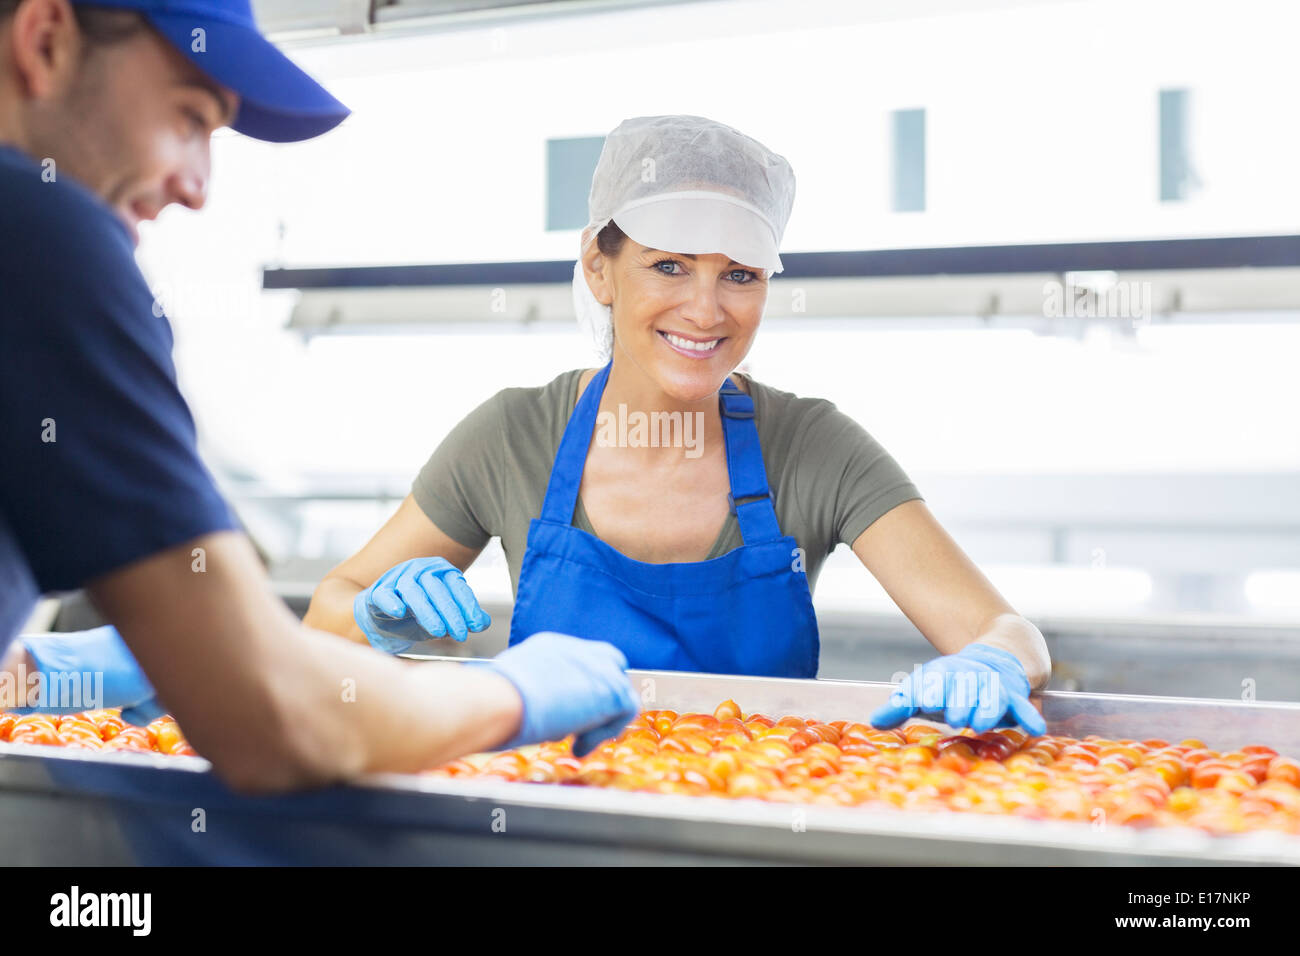 Portrait of confident worker examining tomatoes in food processing plant Stock Photo